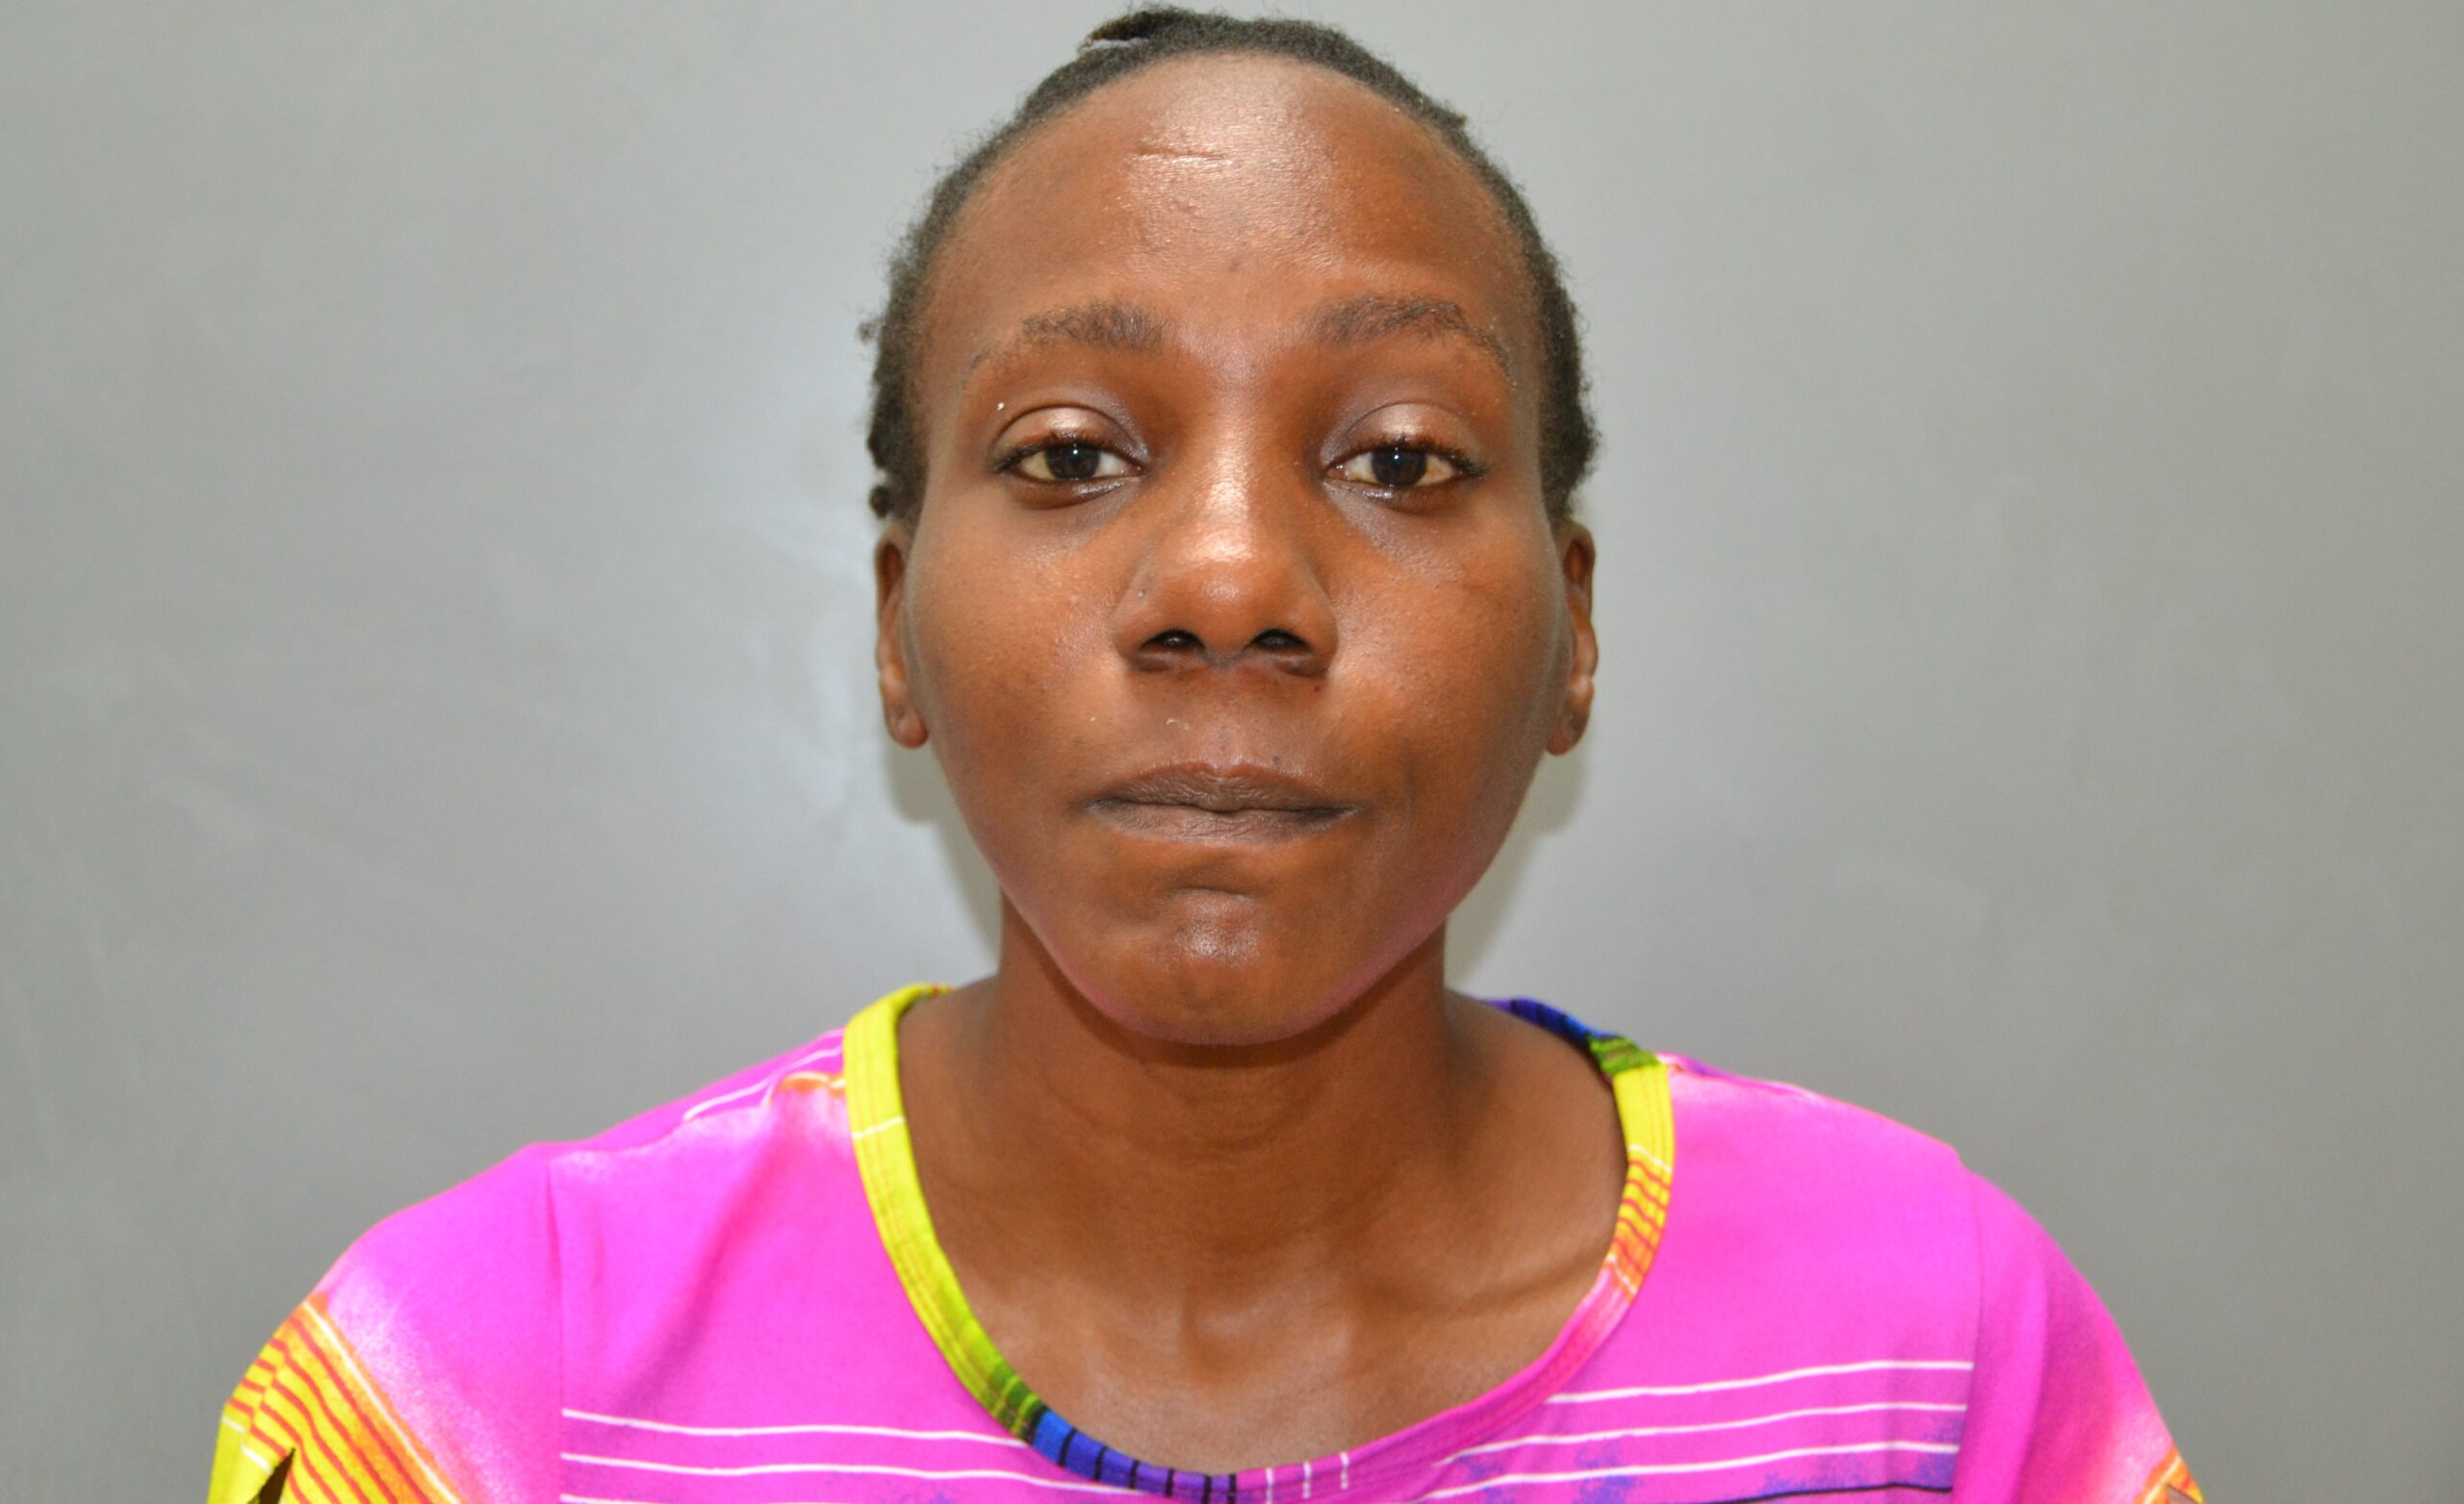 Charlotte Amalie East Woman Charged With Cashing $20,000 Bad Check: VIPD